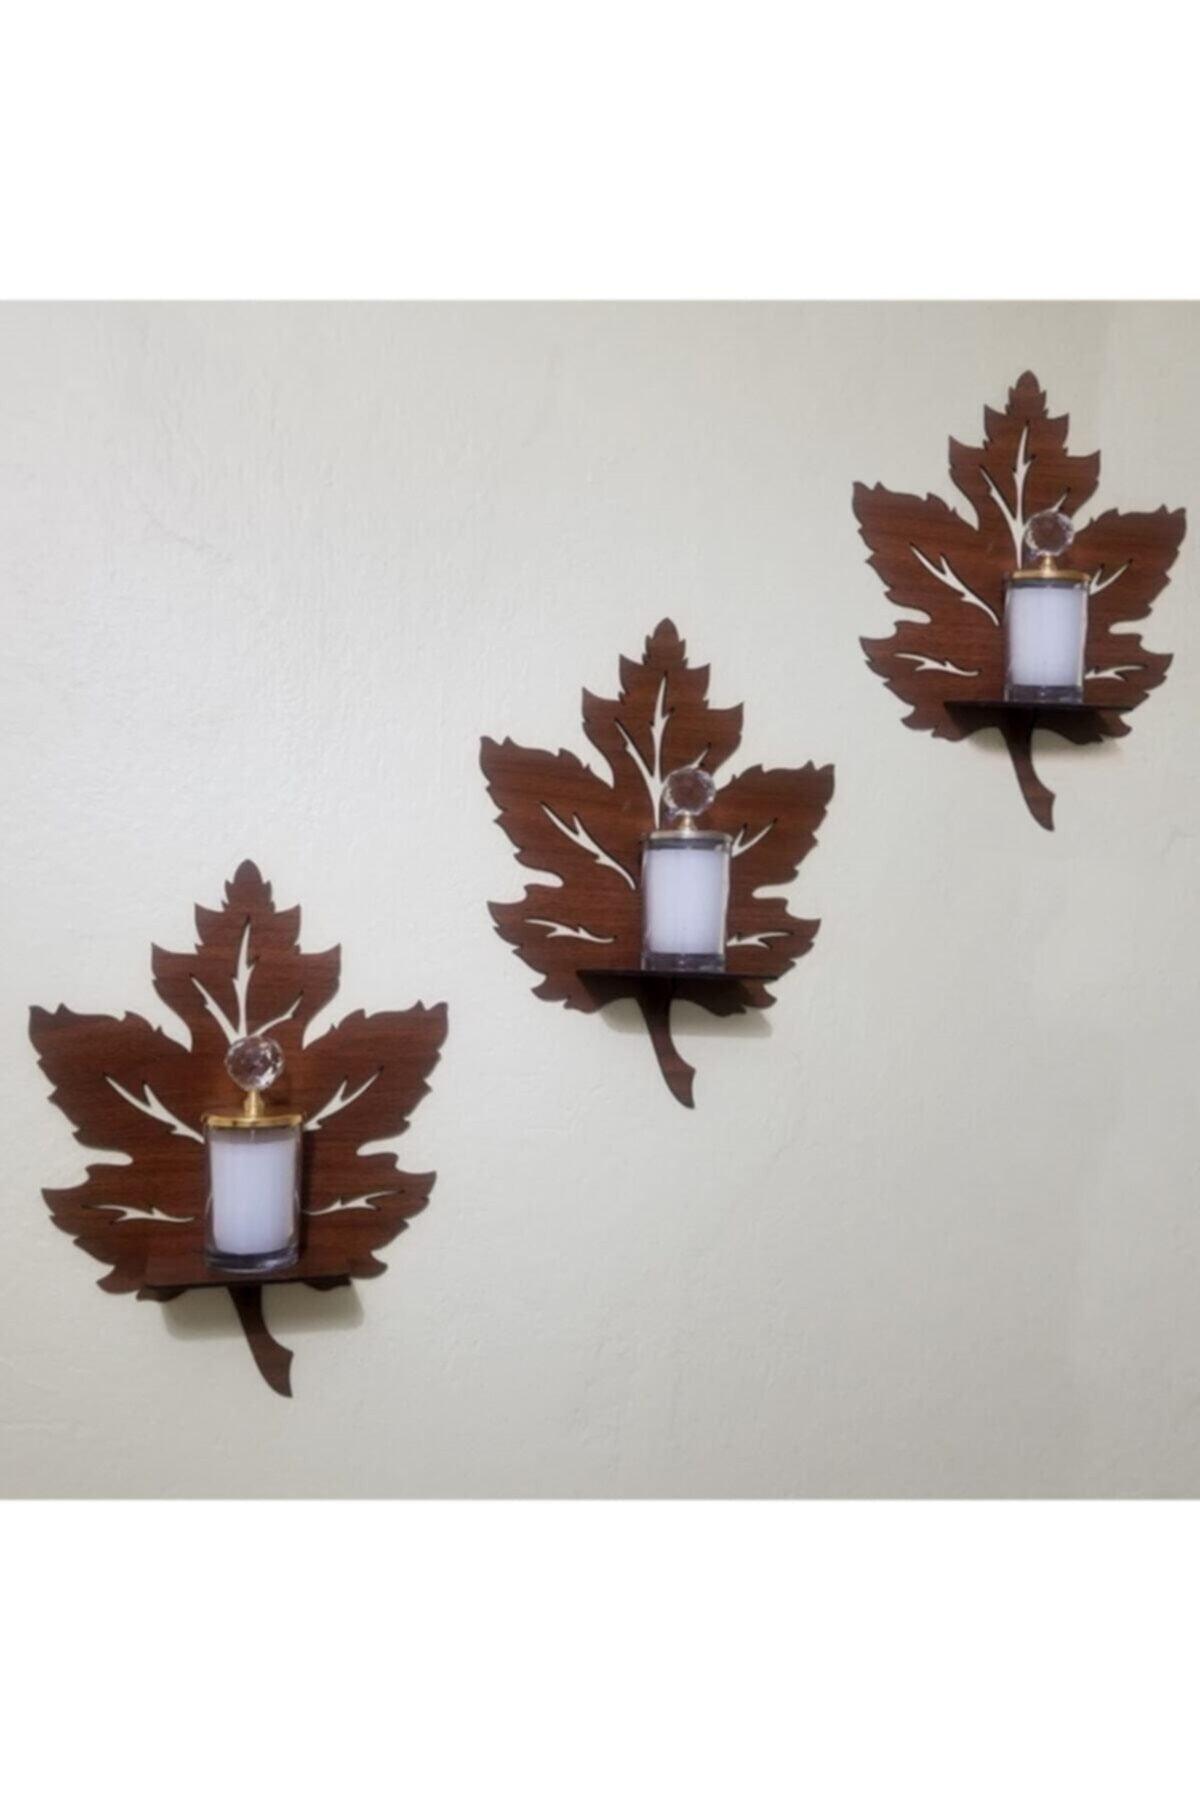 3 Piece Wooden Wall Ornament Shelf Leaf Candle Holder Wall Decor Sconce Table Object 28x21,50 - Swordslife